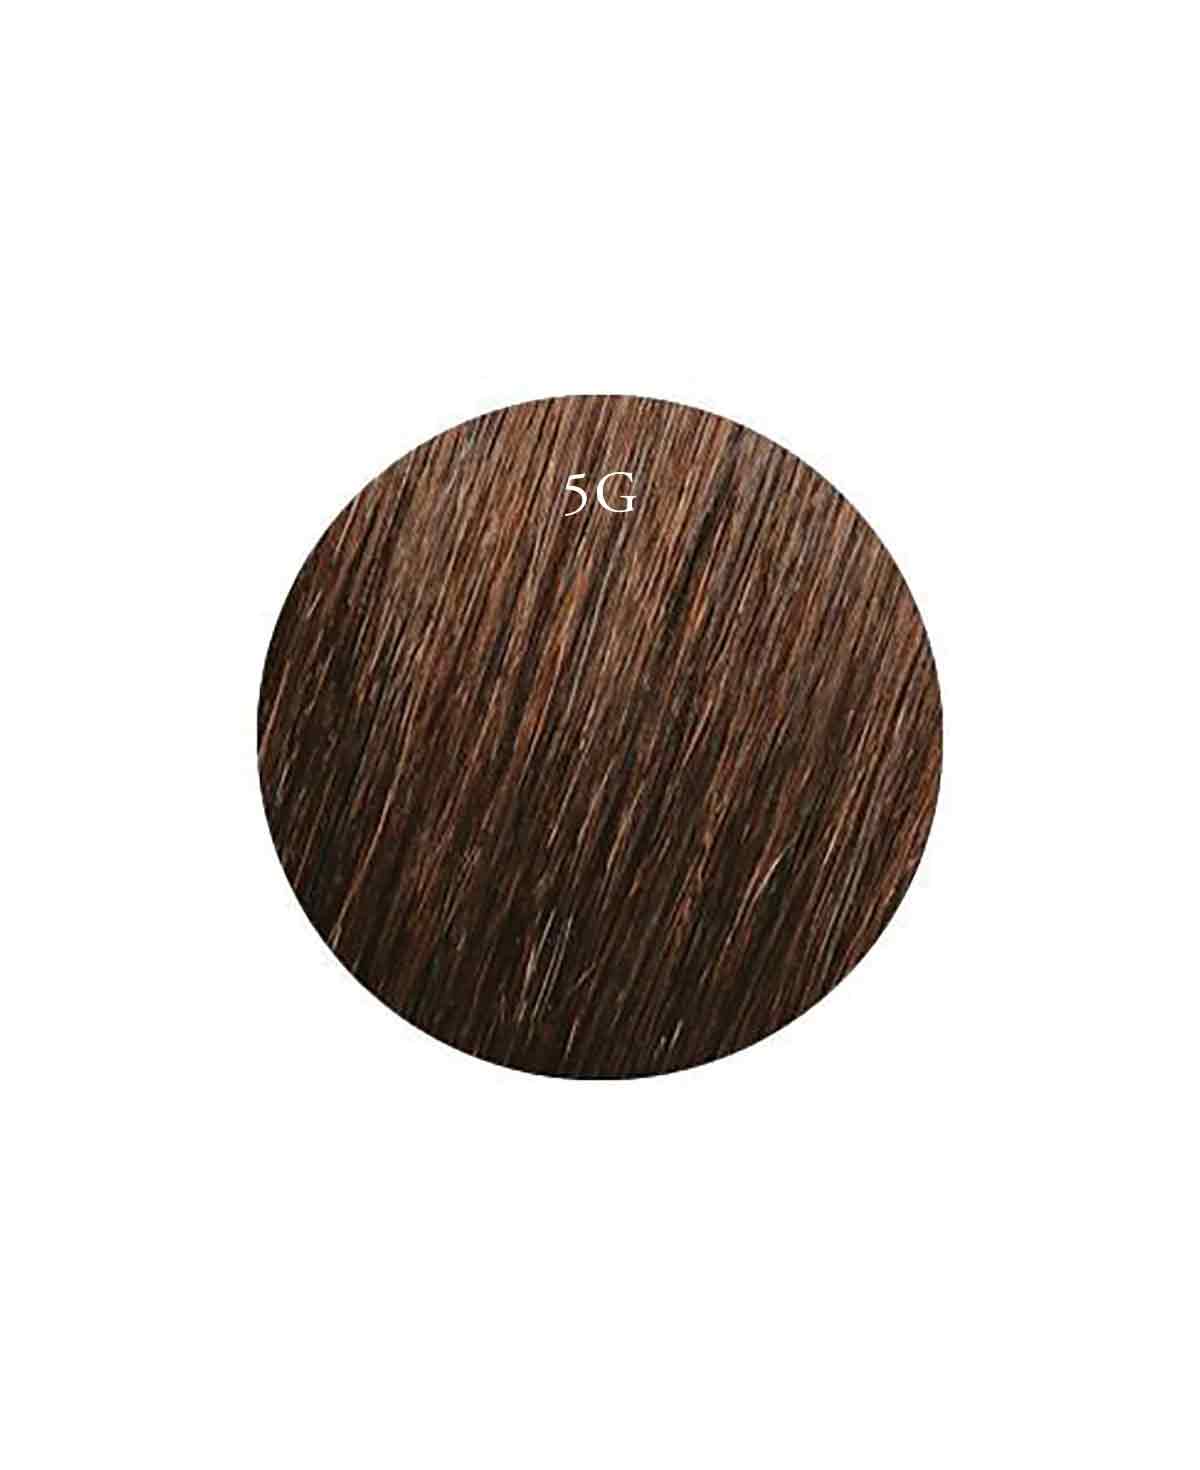 45-50cm (20") TAPE EXTENSIONS - BROWN - 5G